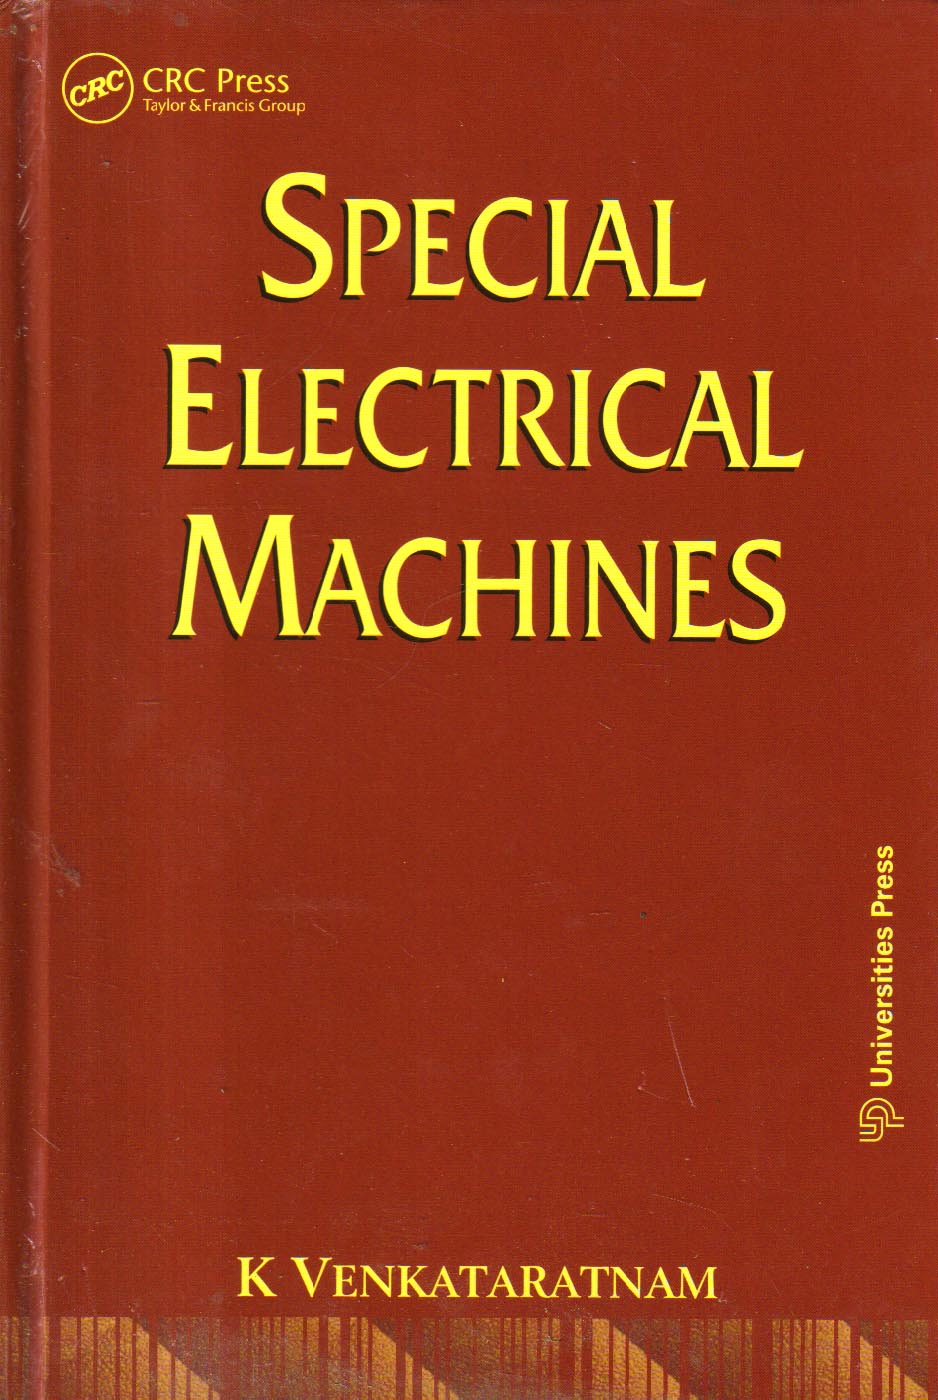 Special Electrical Machines.